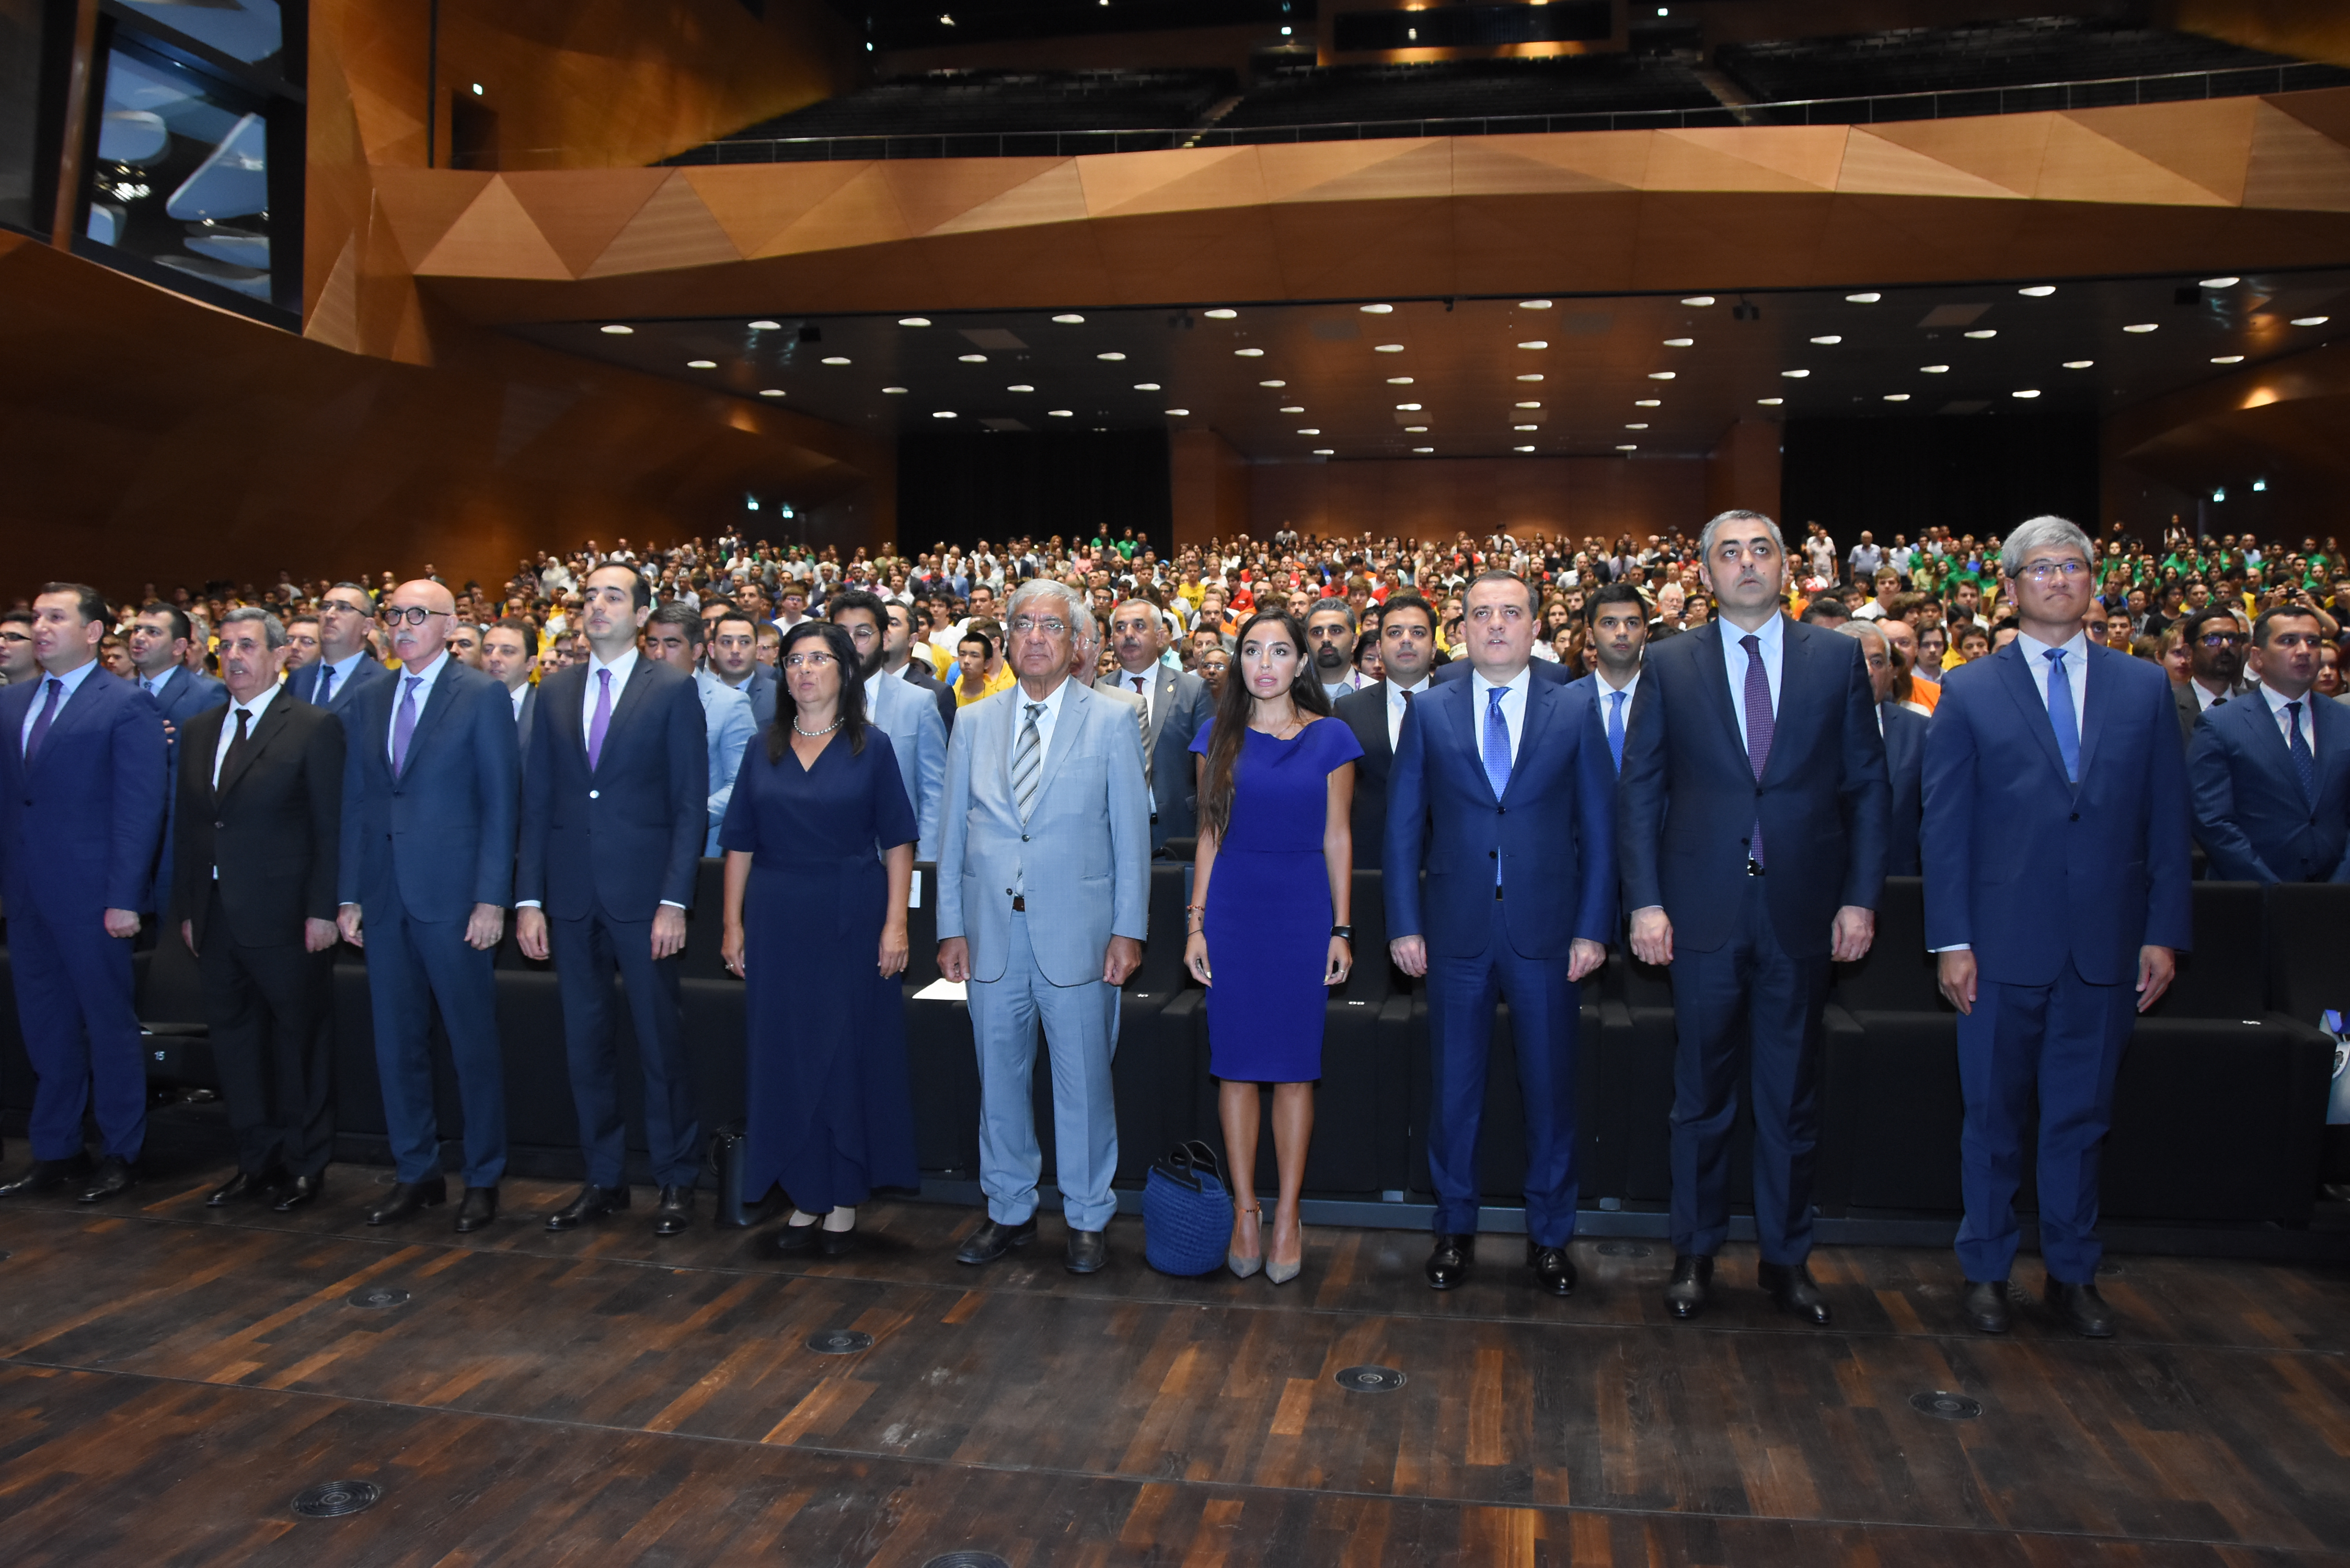 The opening ceremony of the 31st International Olympiad in Informatics